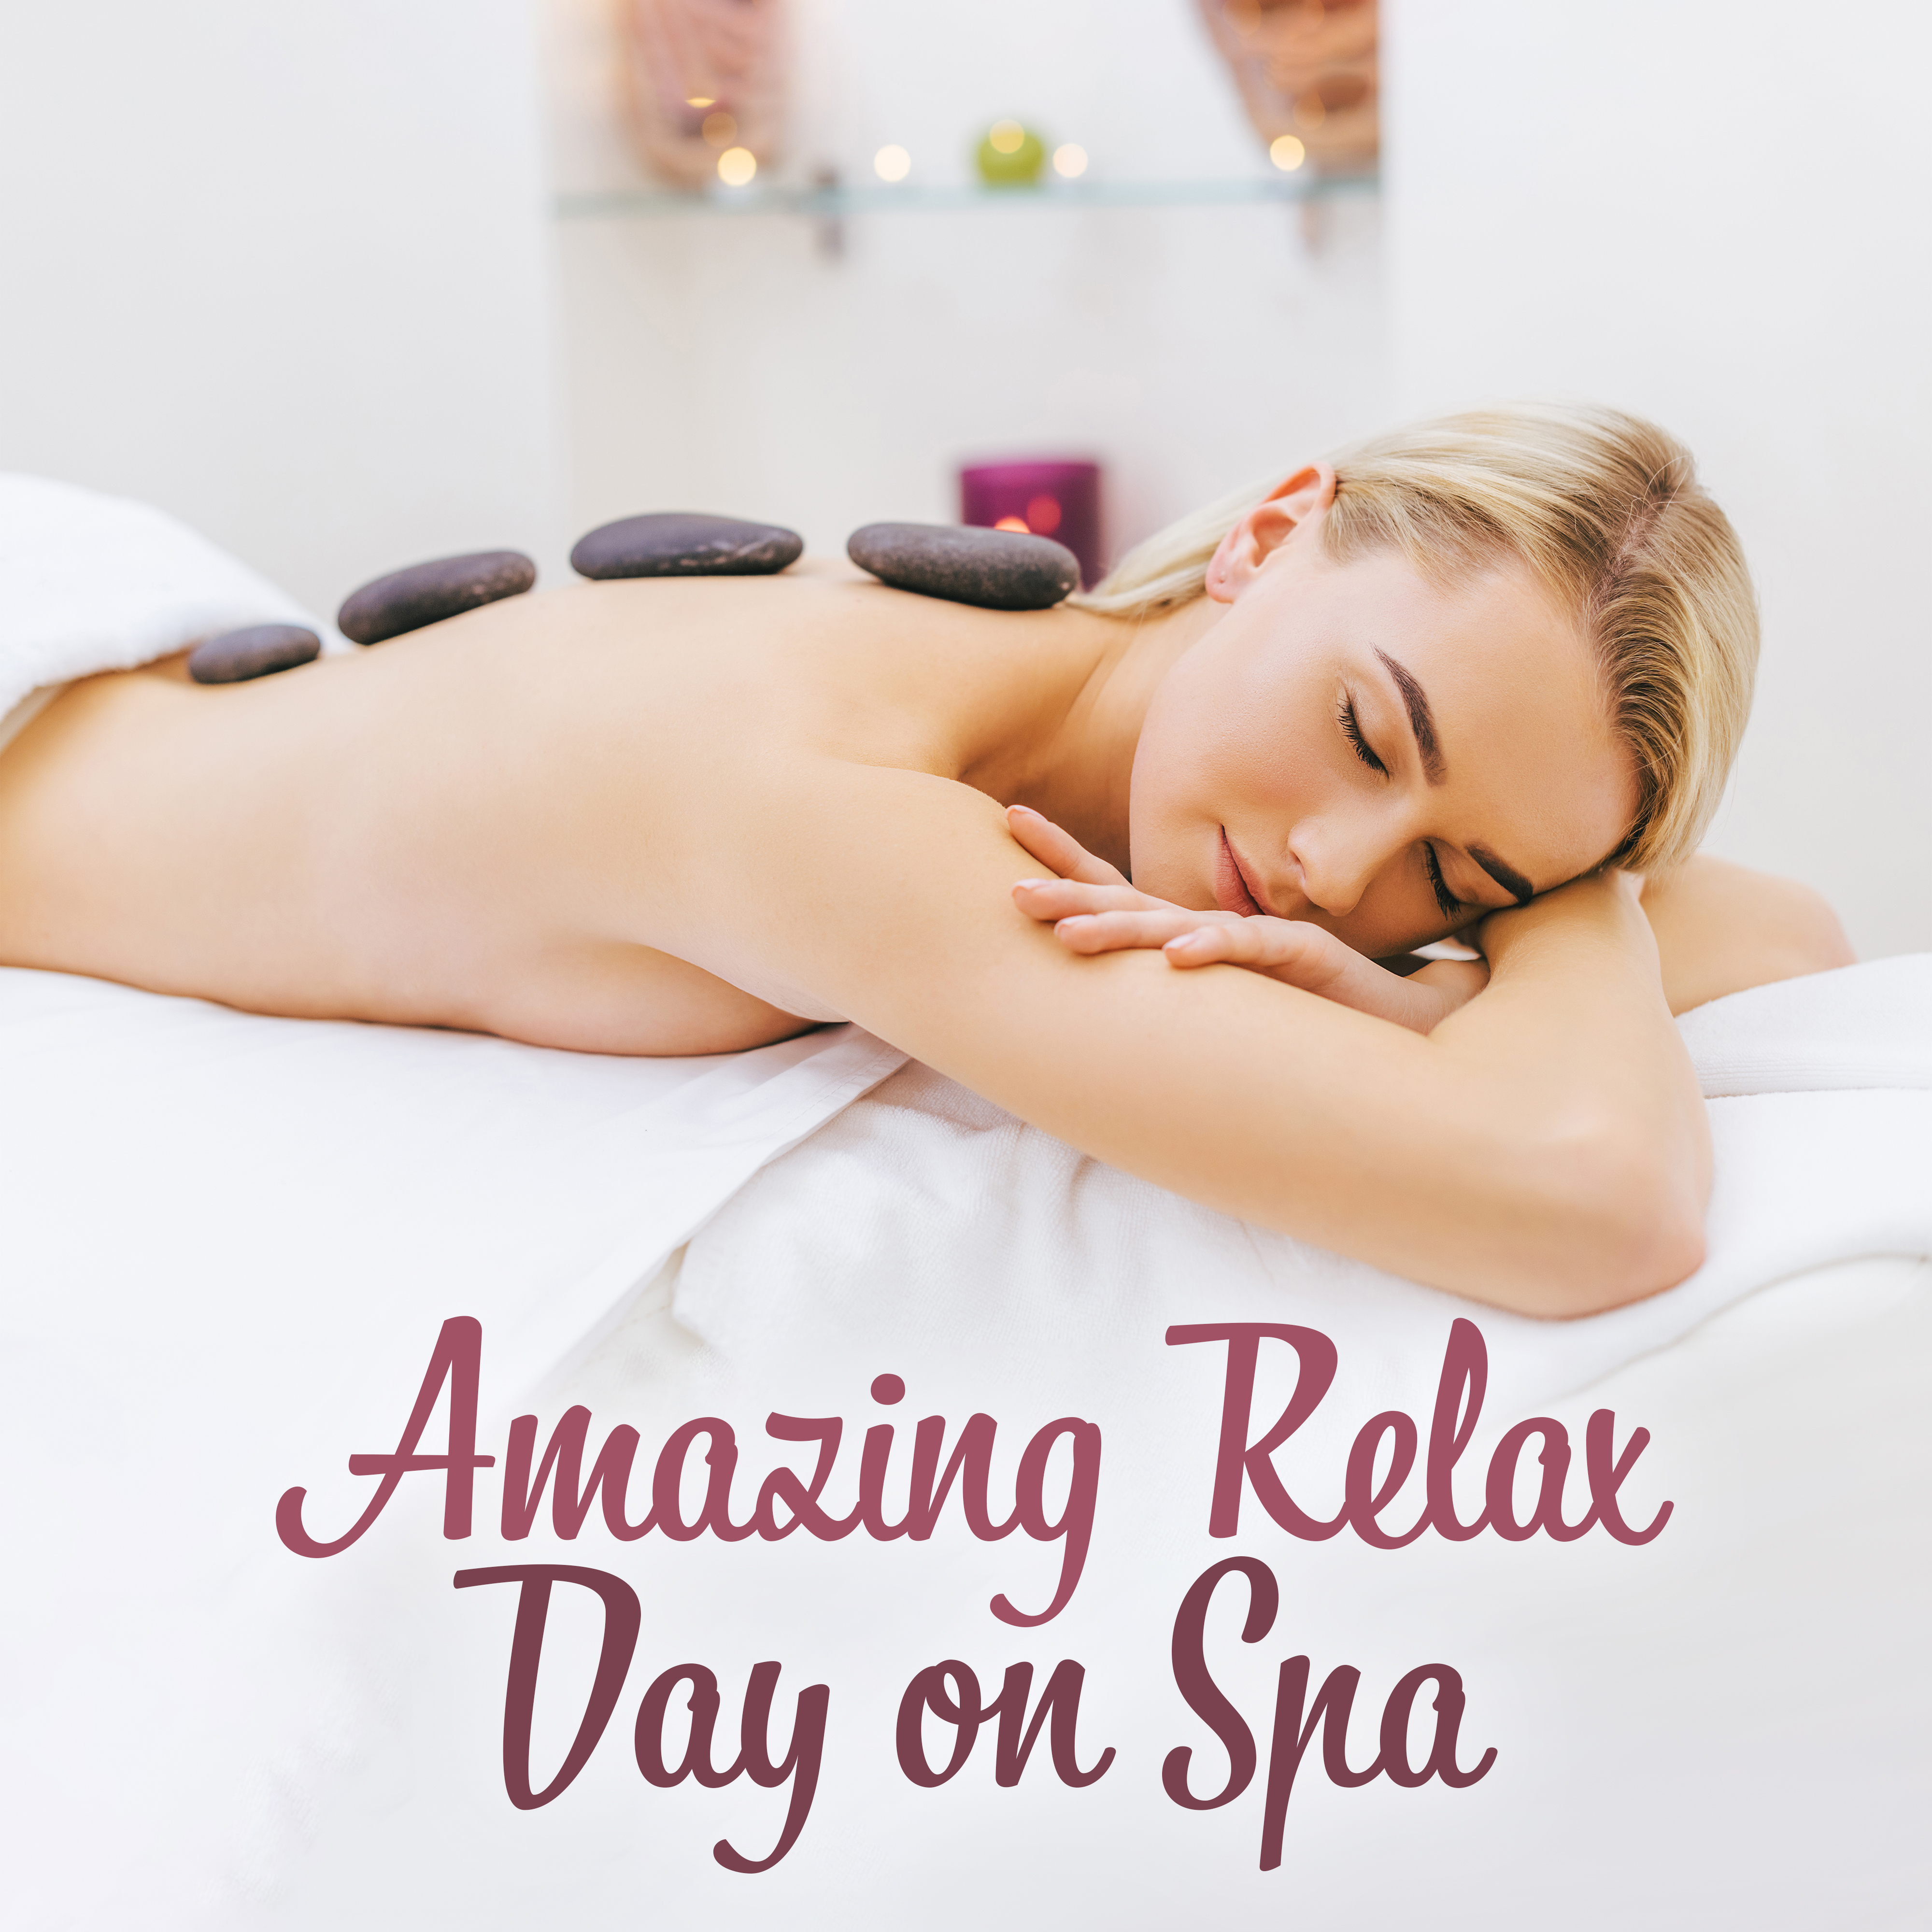 Amazing Relax Day on Spa: New Age Nature Music, Forest & Water Sounds for Perfect Spa & Wellness Relax Day, Massage Background Calming Songs